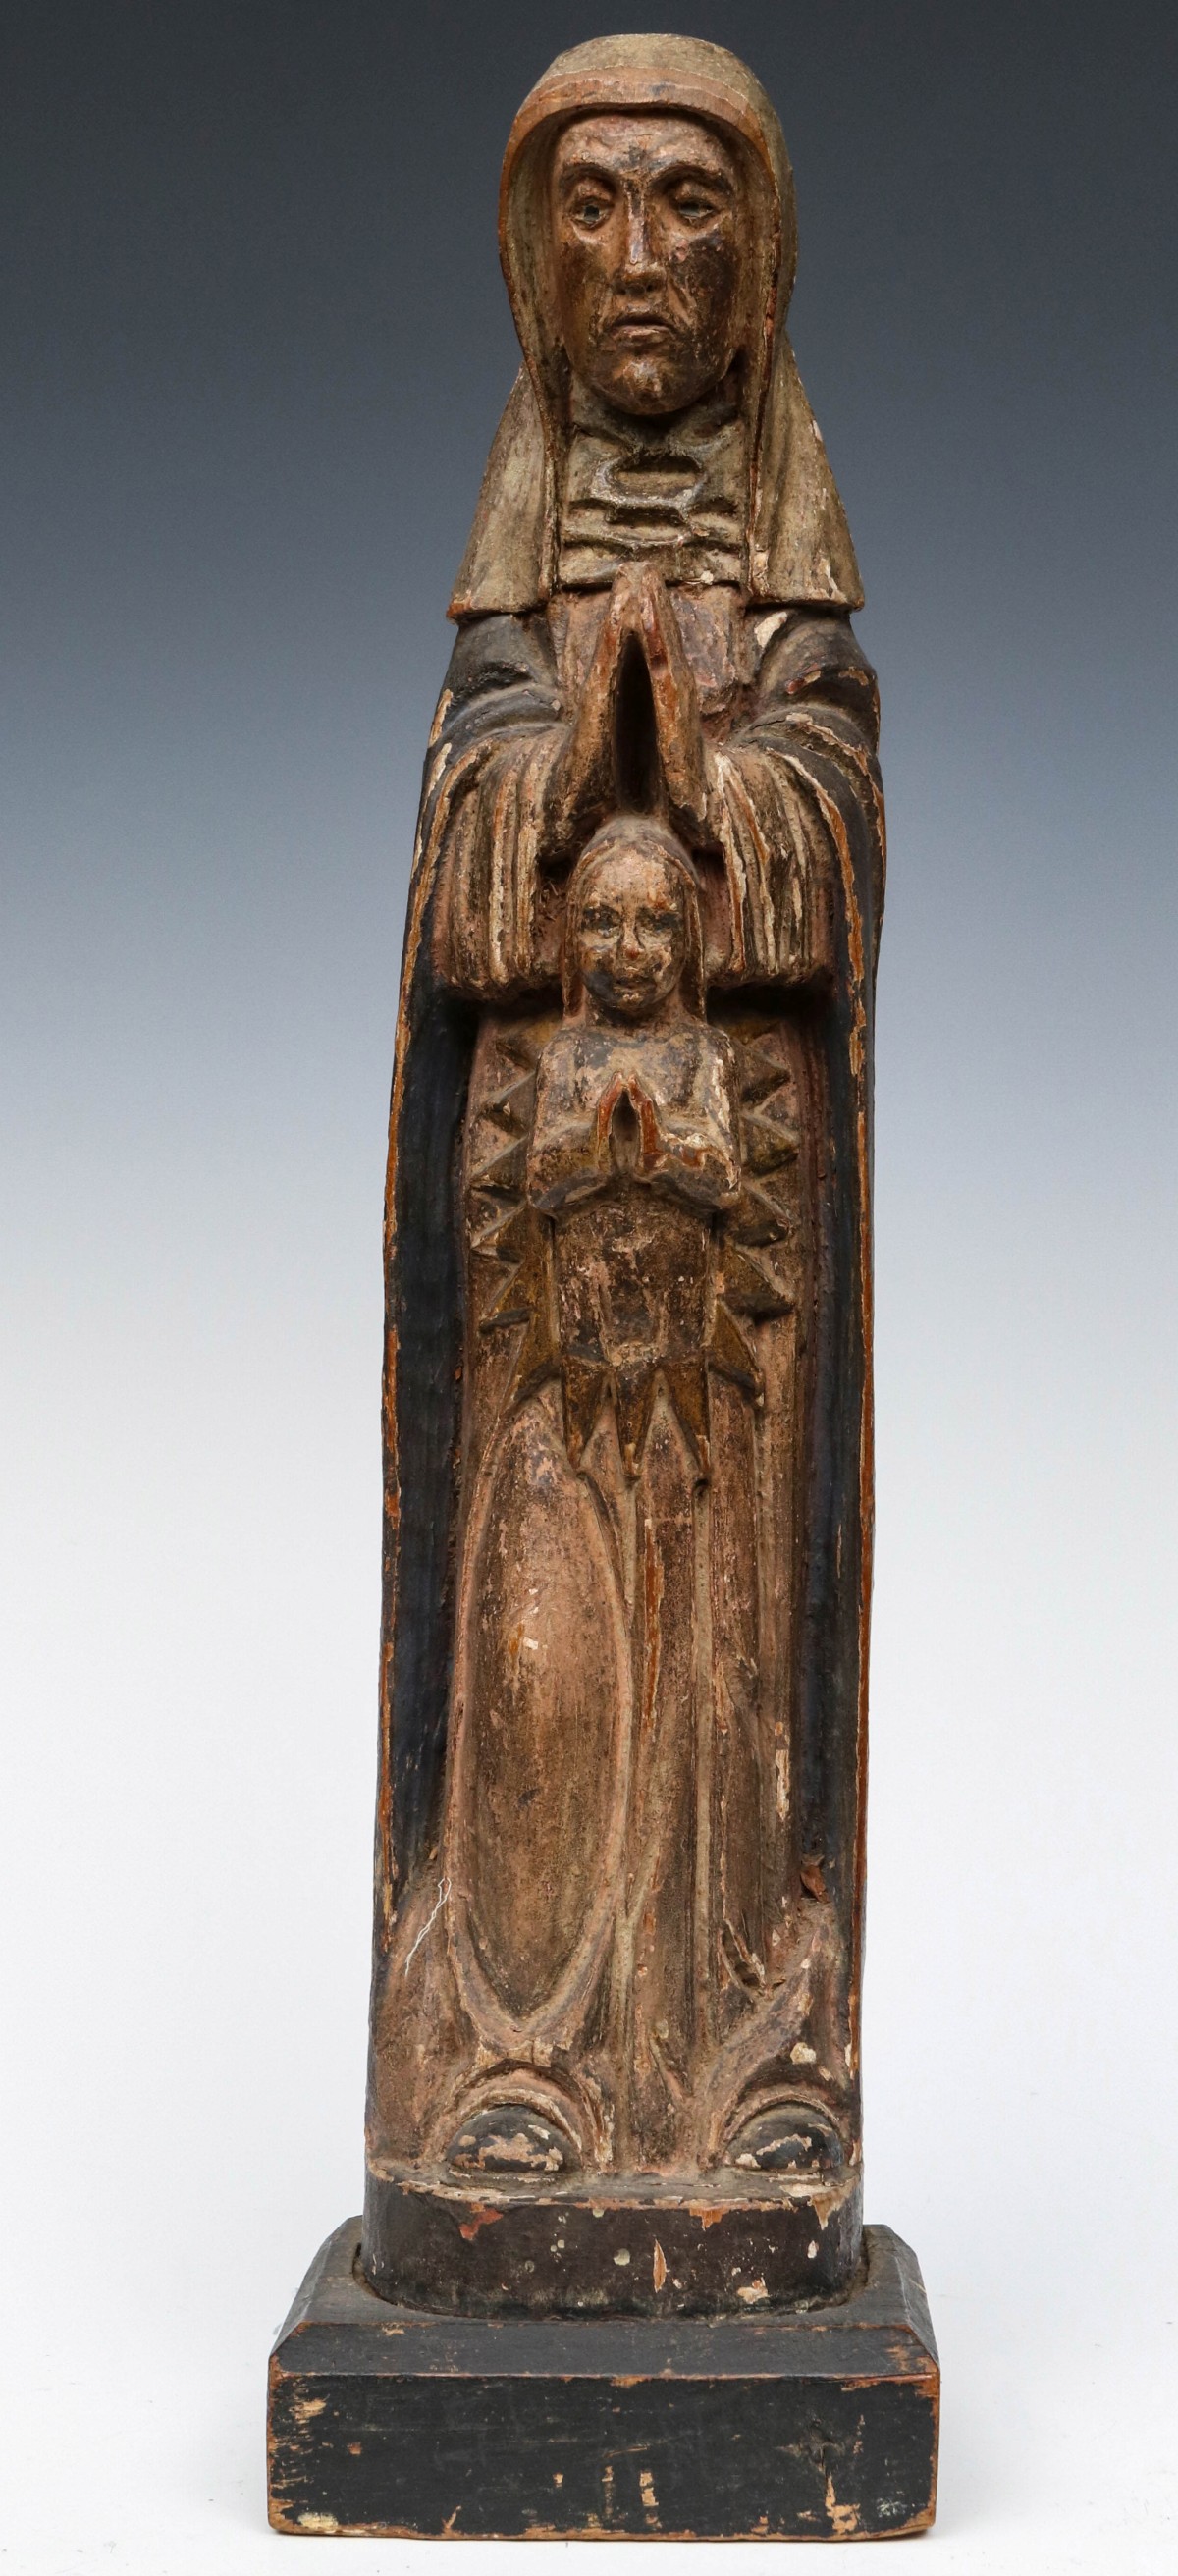 A 17TH / 18TH CENTURY CONTINENTAL FIGURE OF THE MADONNA